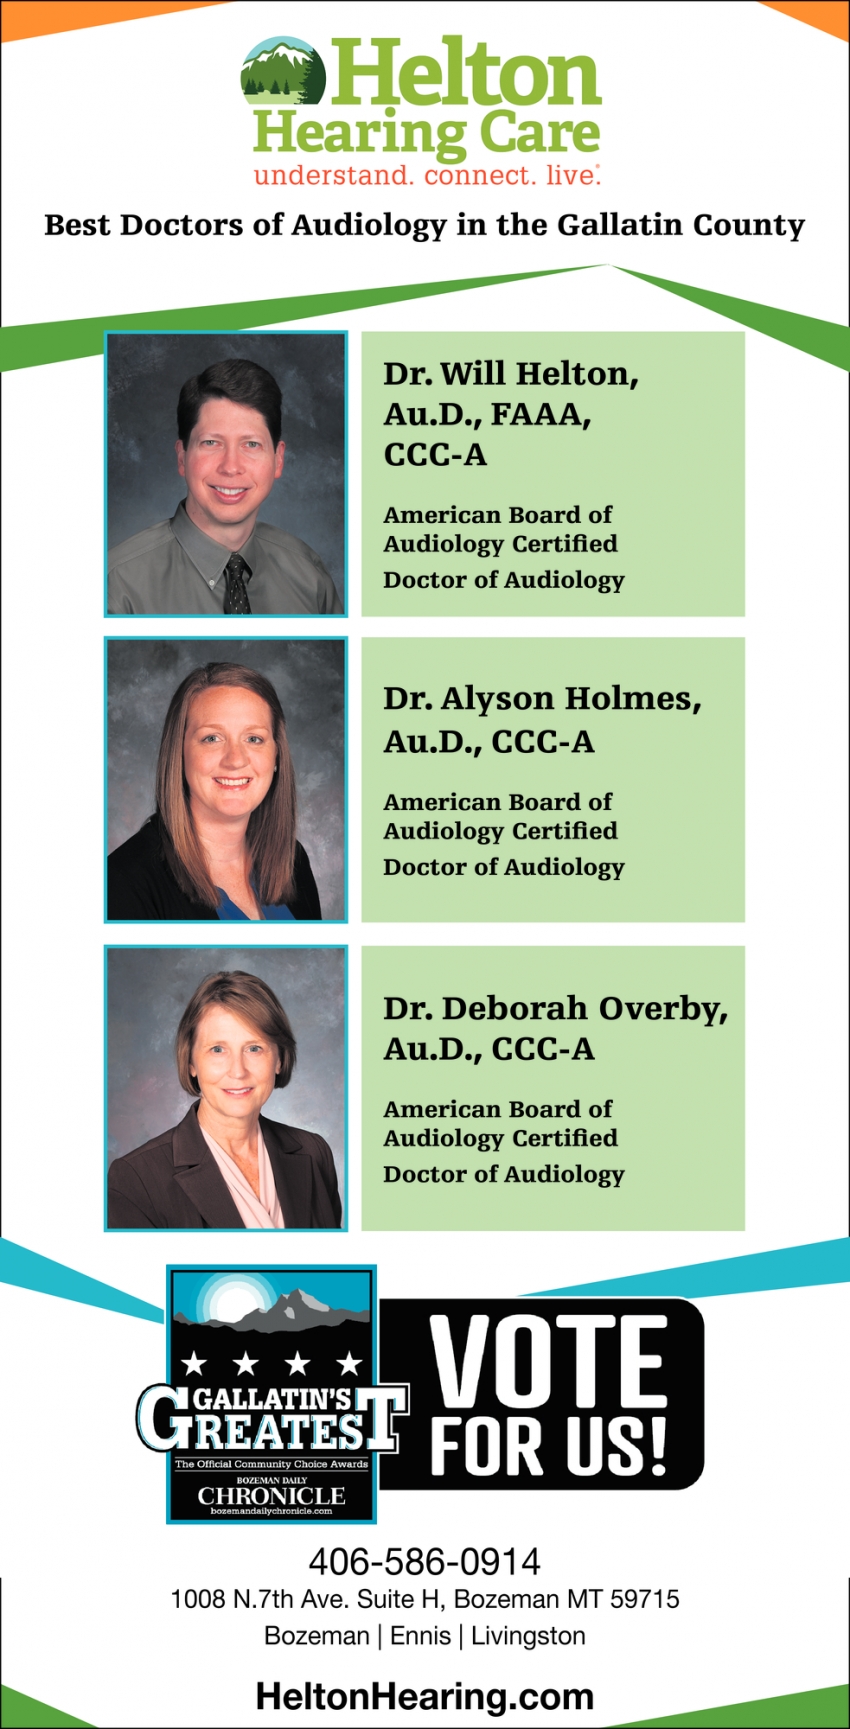 Best Doctors of Audiology in the Gallatin County